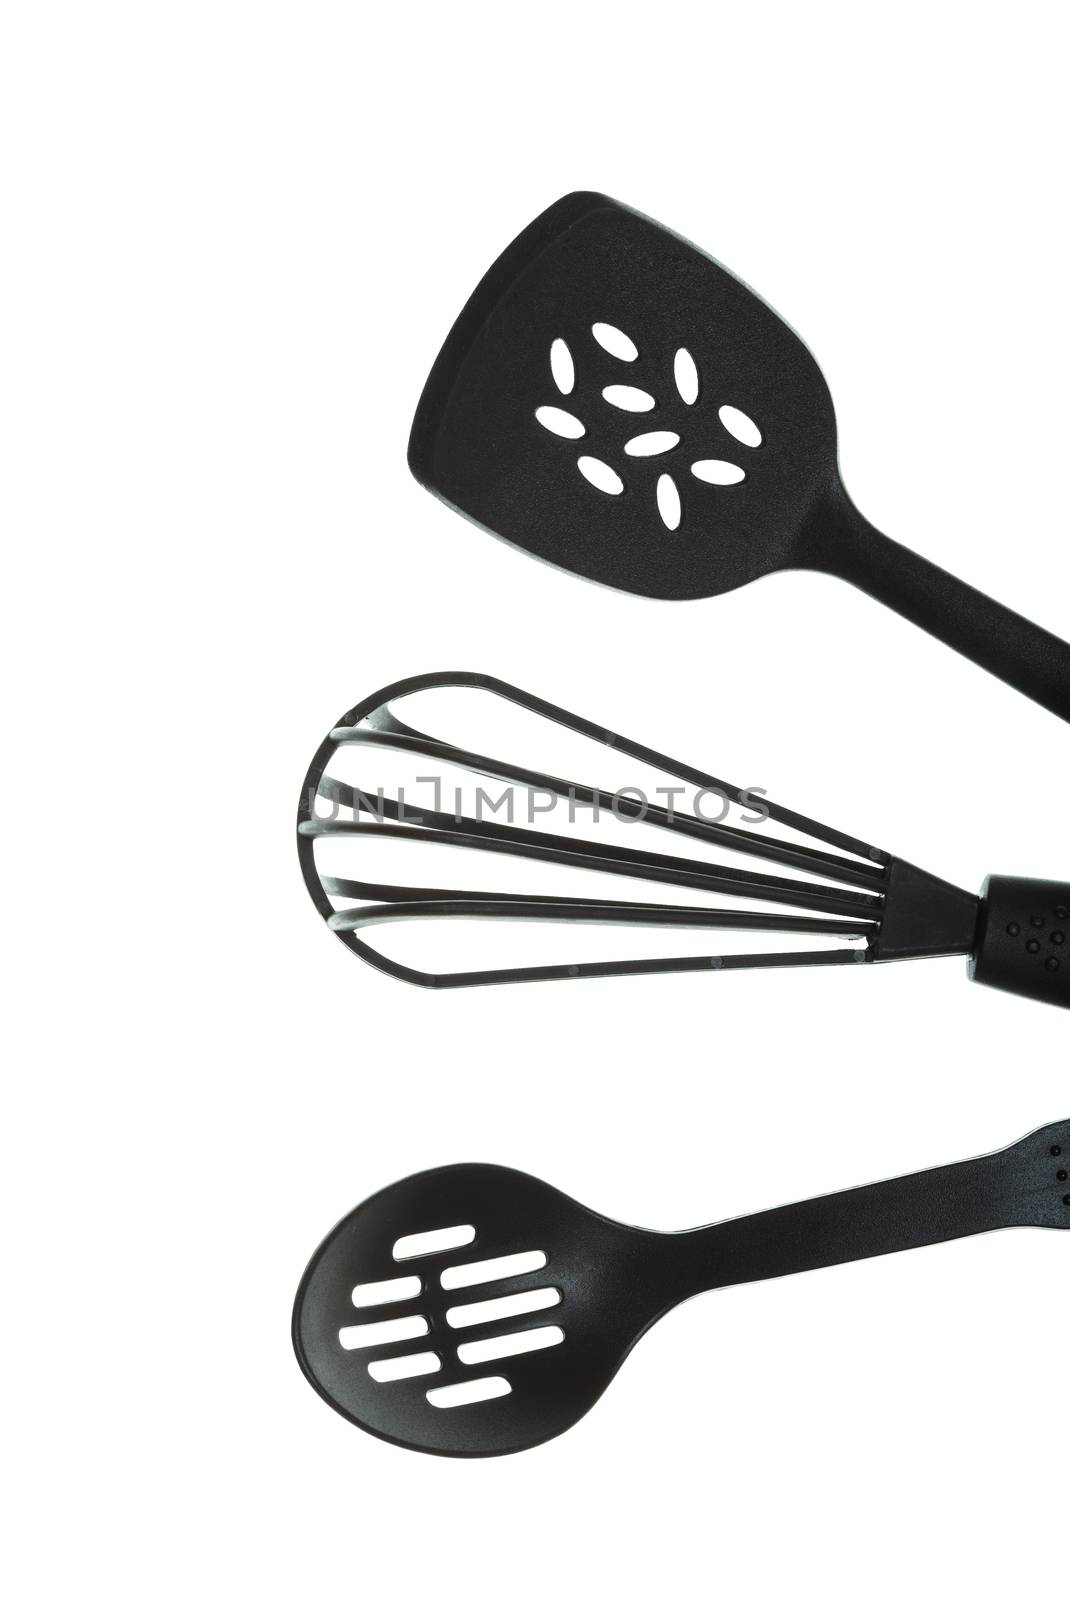 Black cooking utensils on a white background.